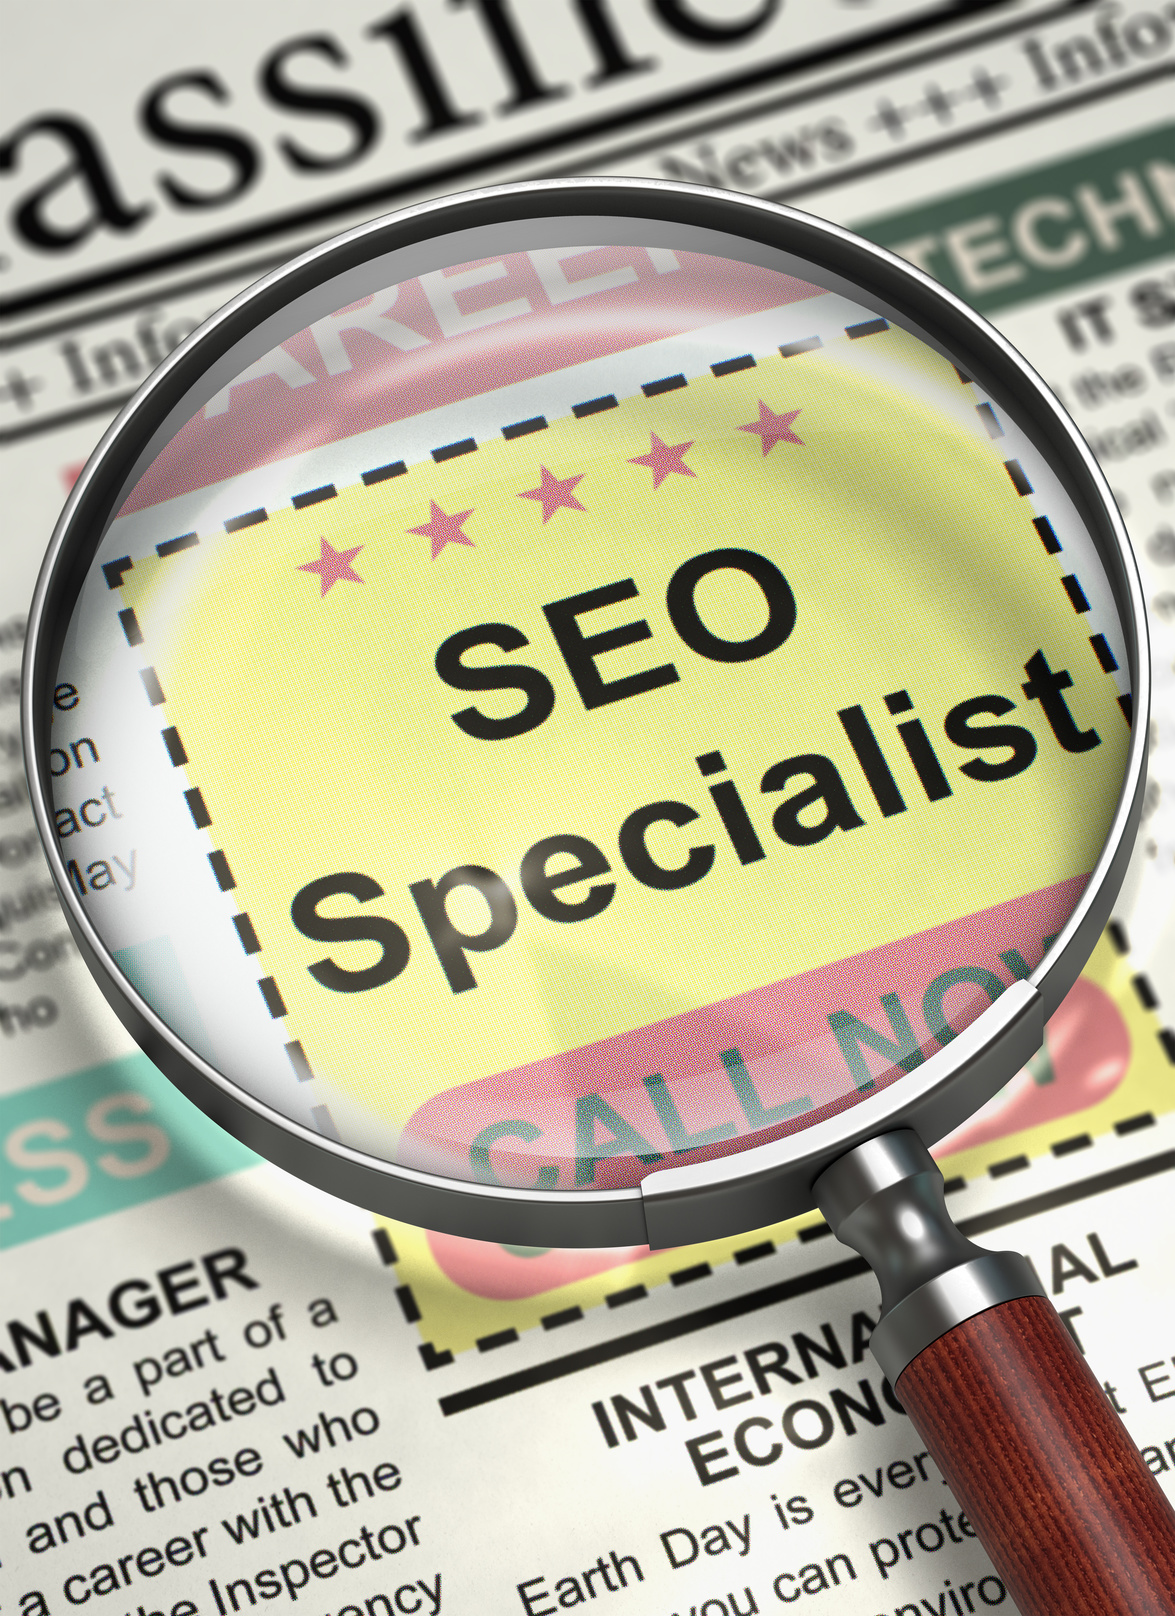 Local SEO Expert: 11 Strategies to Implement - FindABusinessThat.com